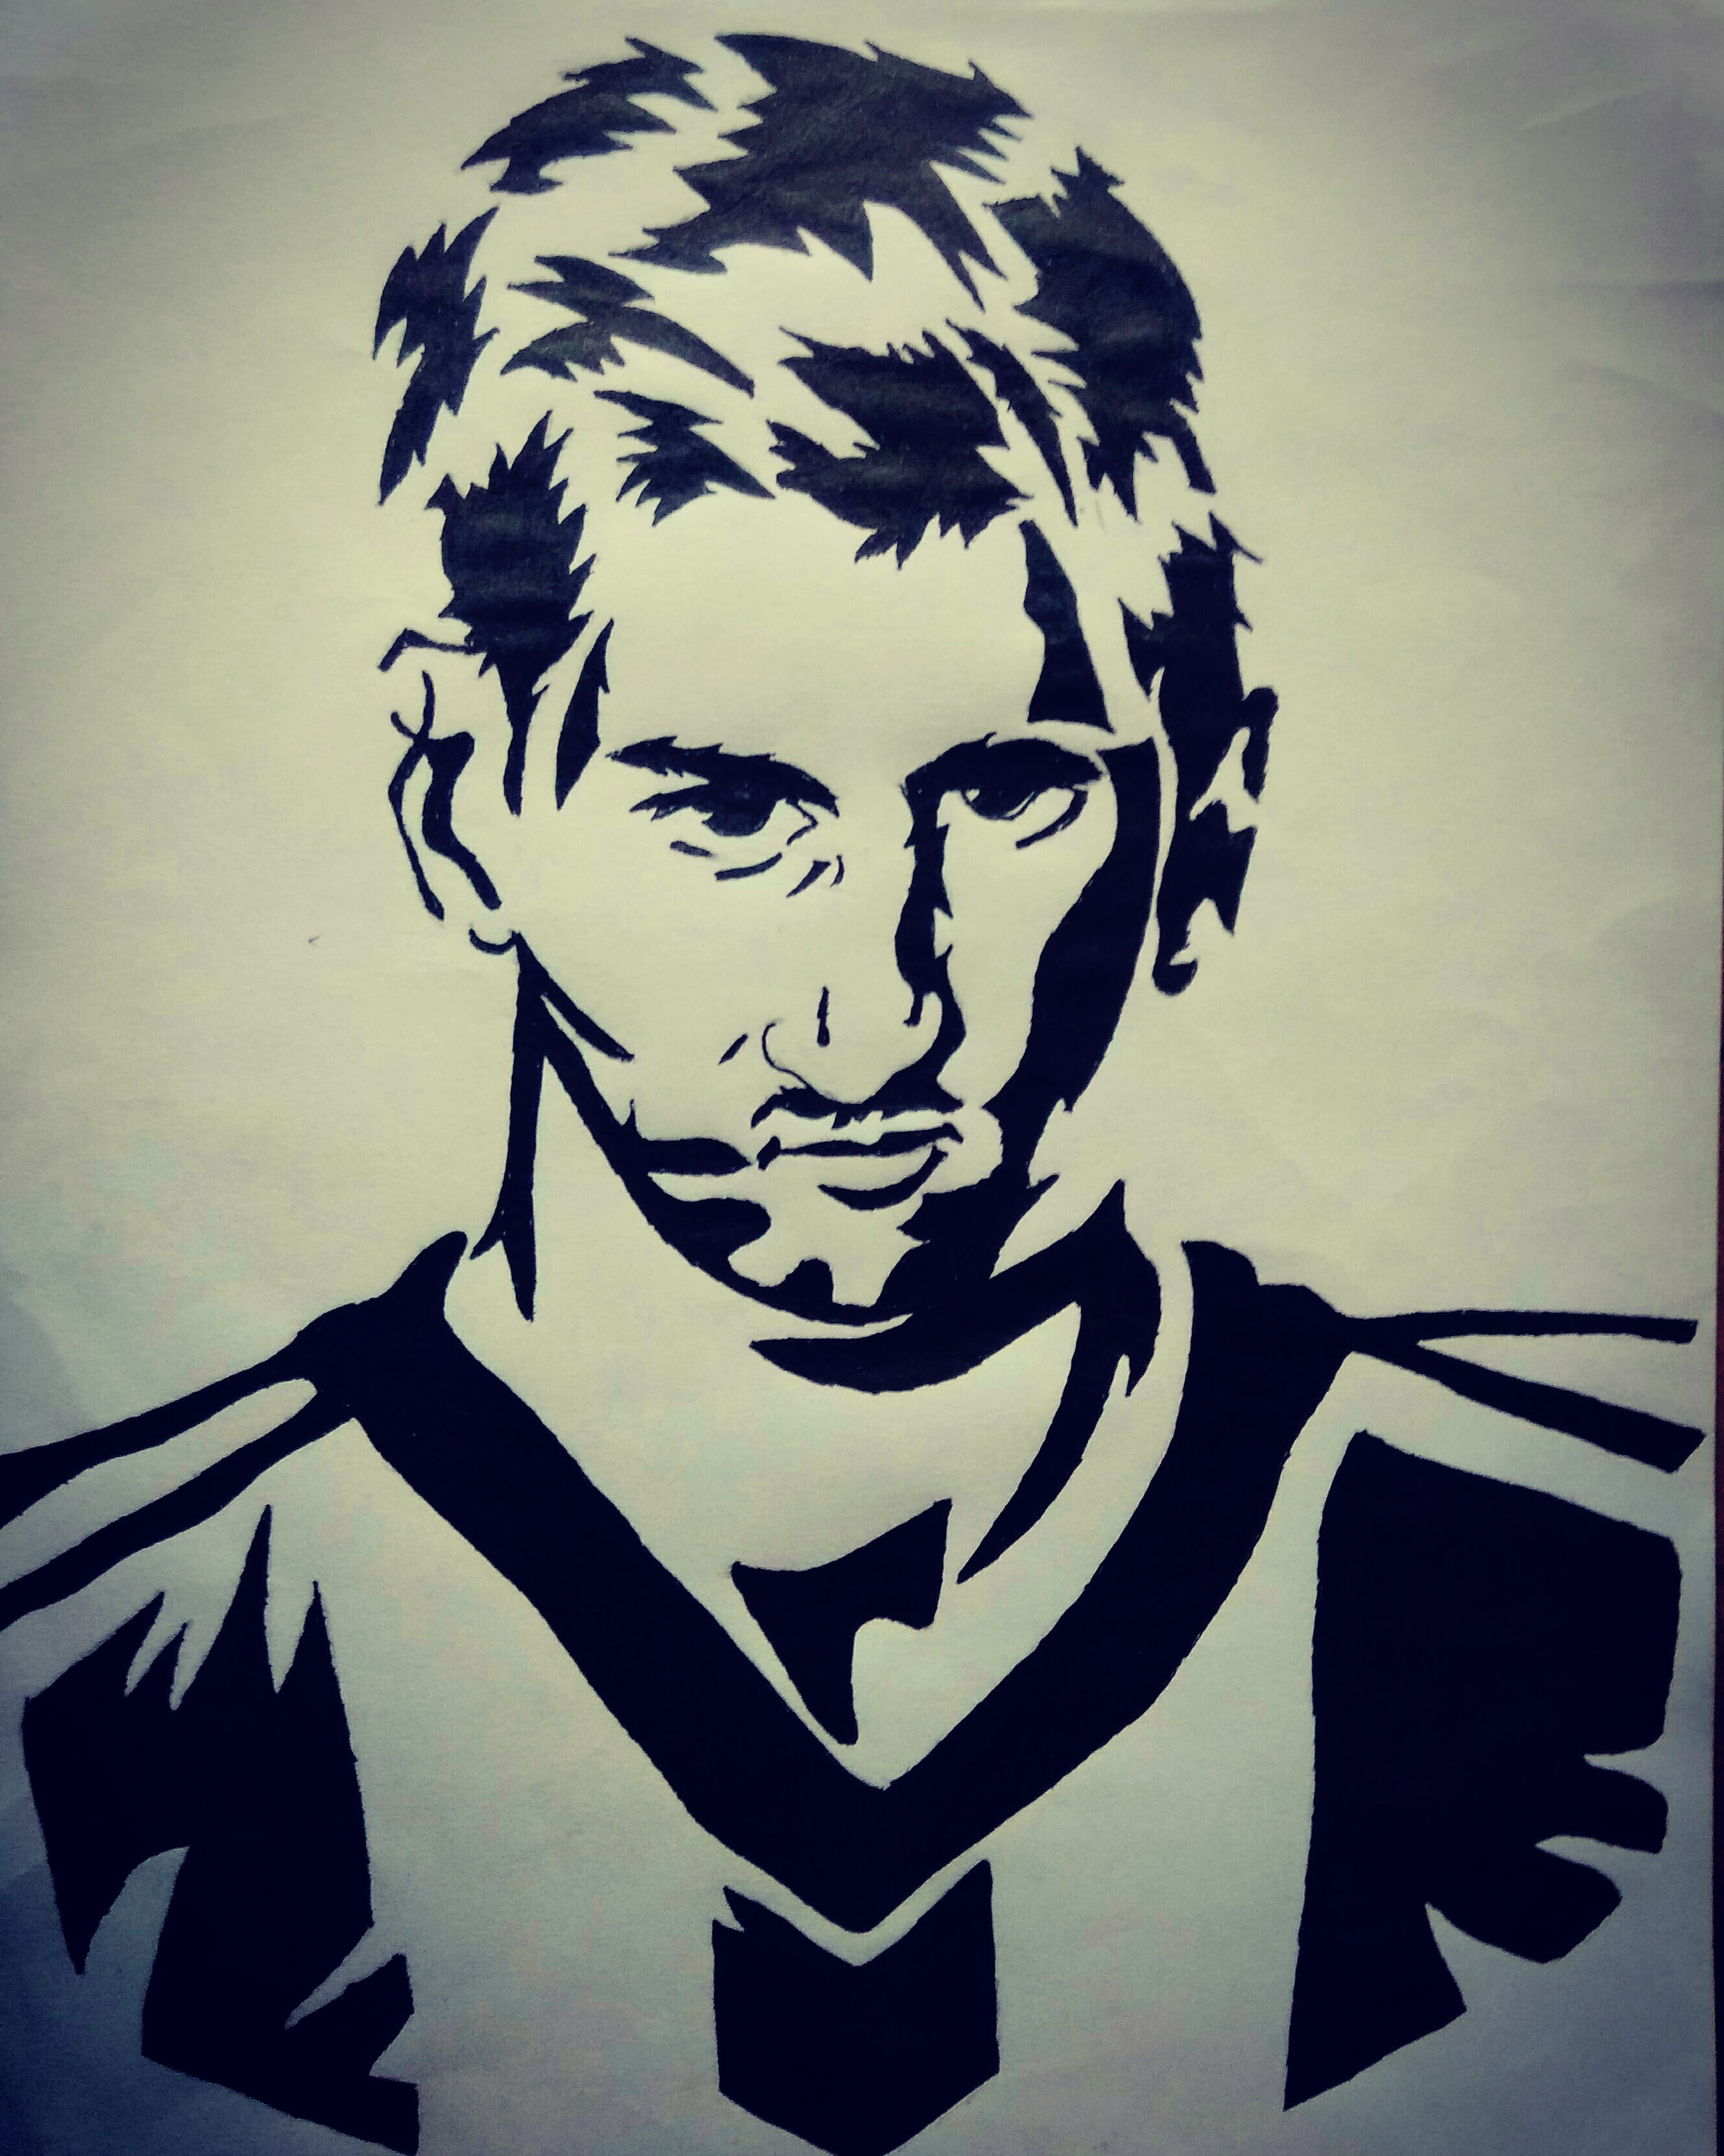 Lionel Messi | How To Draw Lionel Messi With A Beard | Stencil Art - YouTube